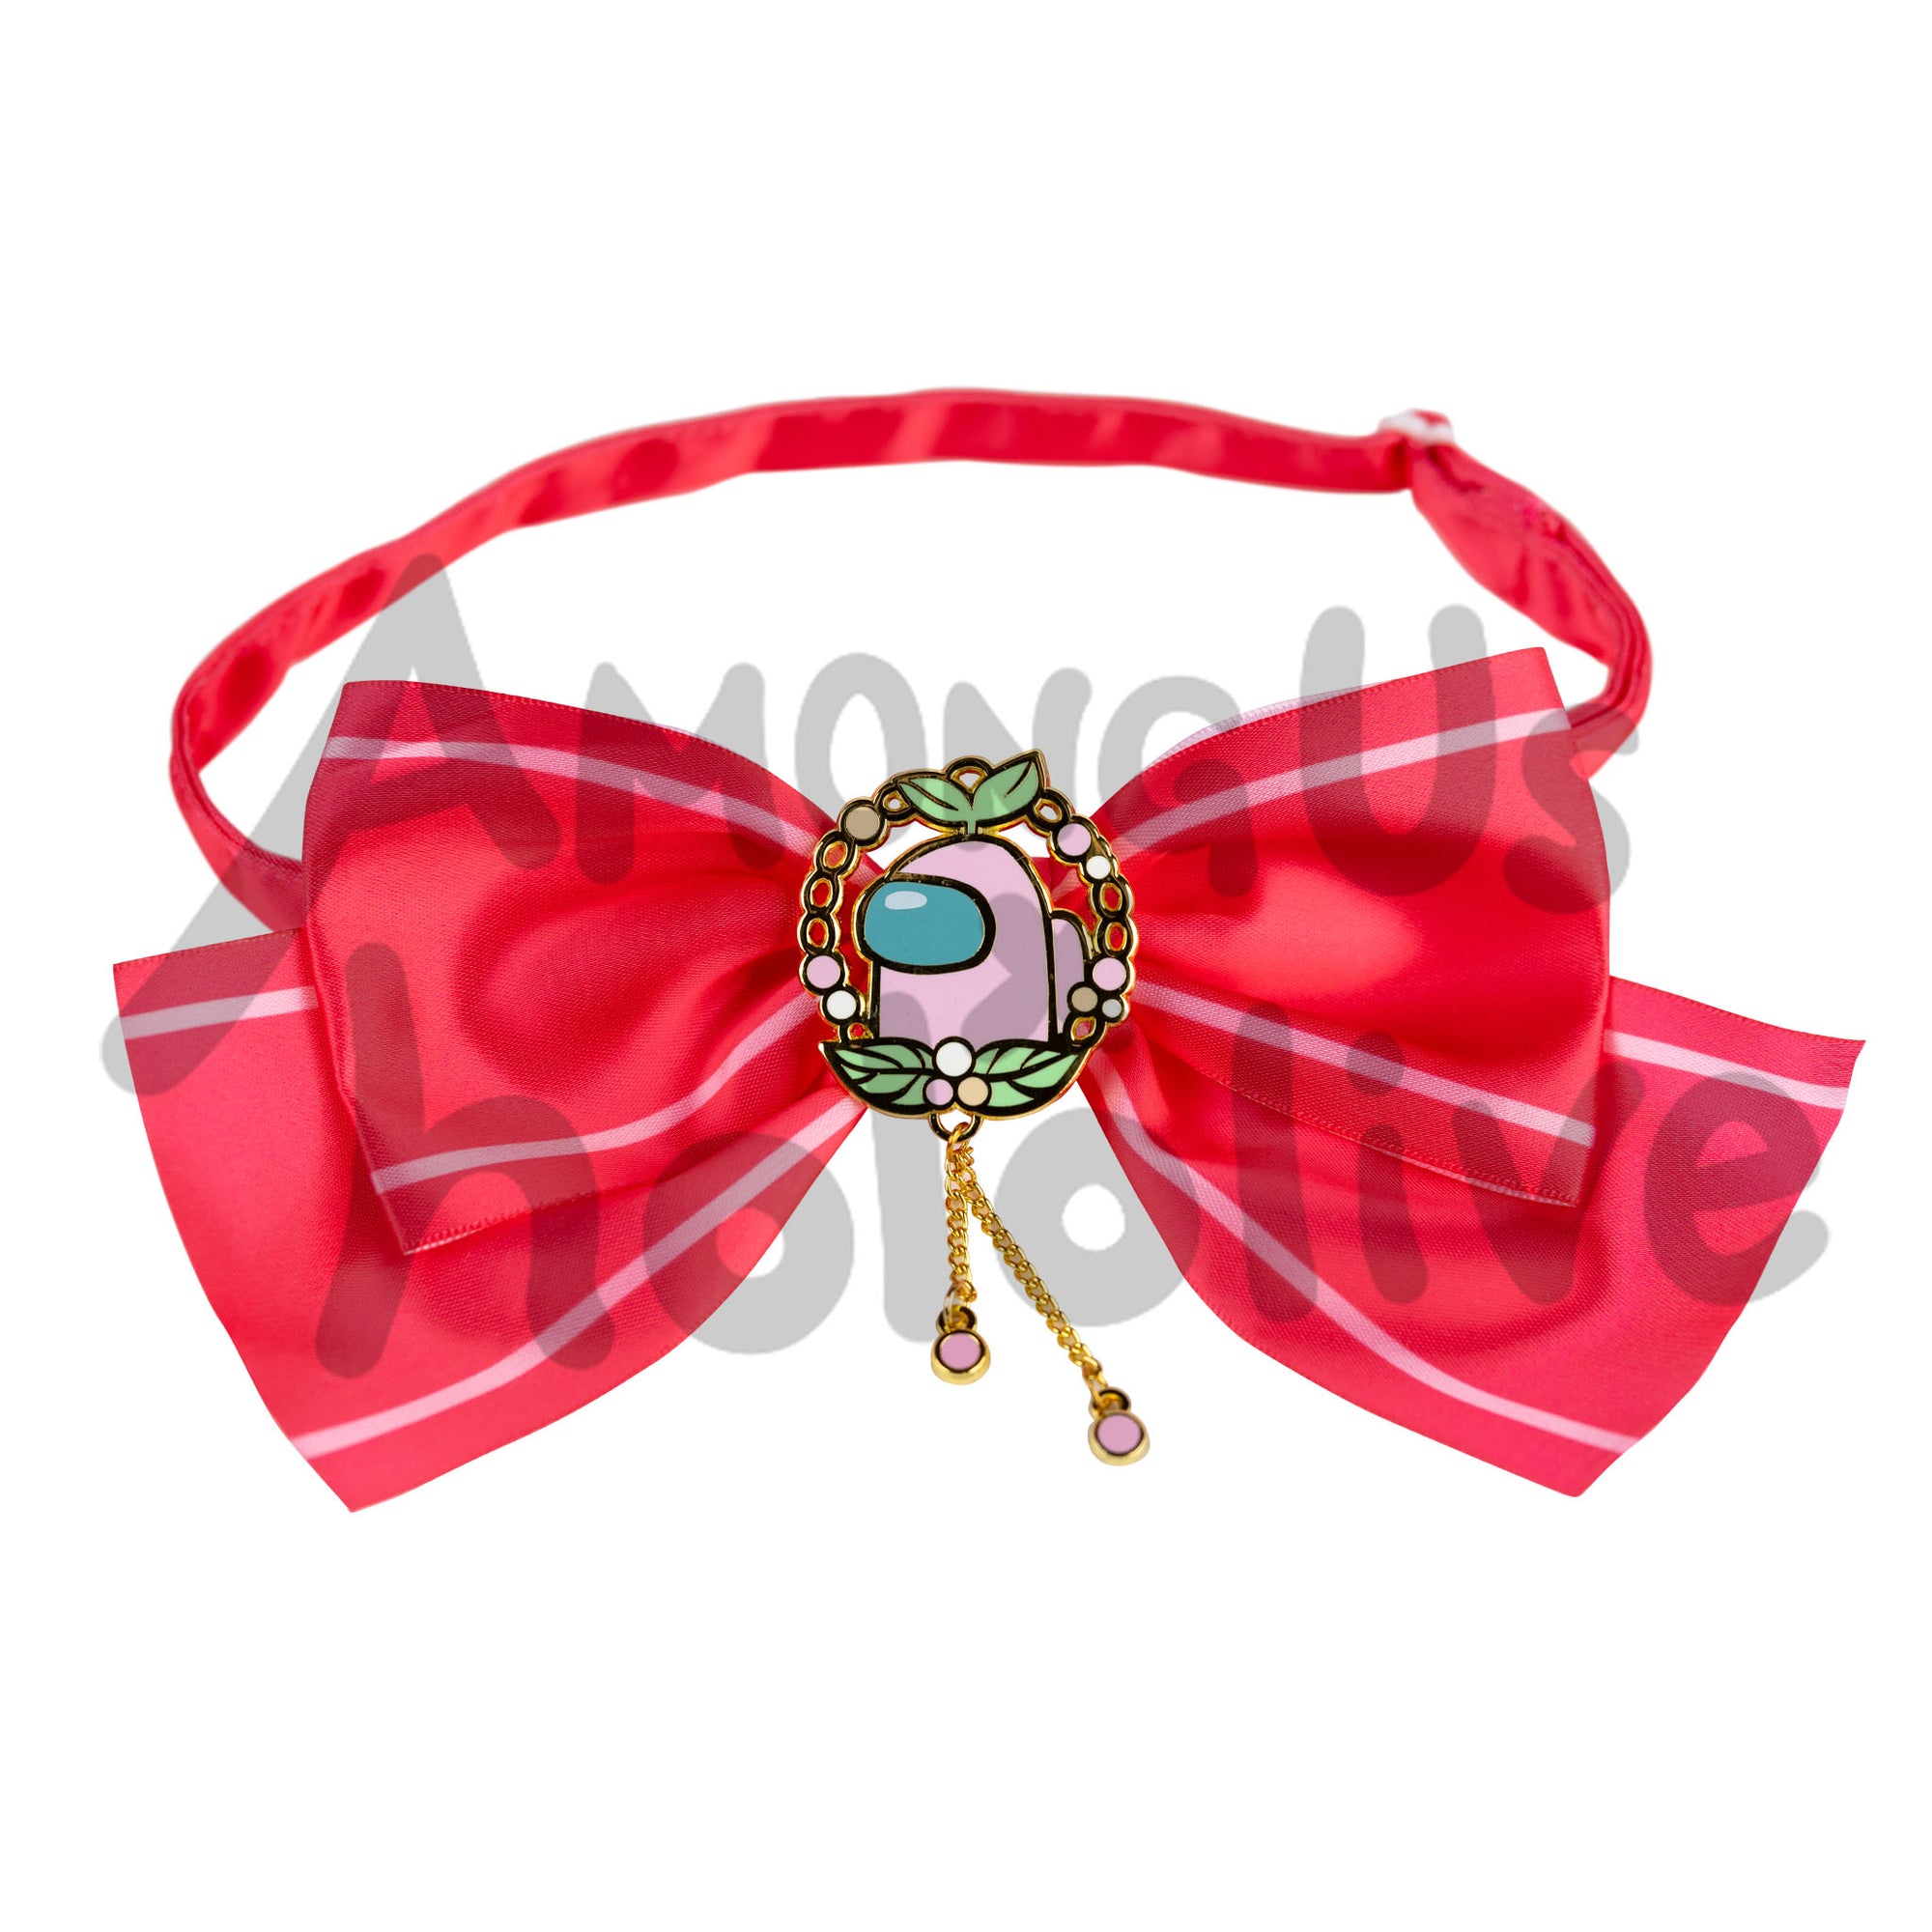 A product photo of a red hair bow with two light pink border stripe accents. At the center of the bow is an enamel charm. The charm depicts a rose crewmate with a light green sprout hat in the center of a berry wreath. Two circular pink charms dangle from the center charm from delicate gold chains.